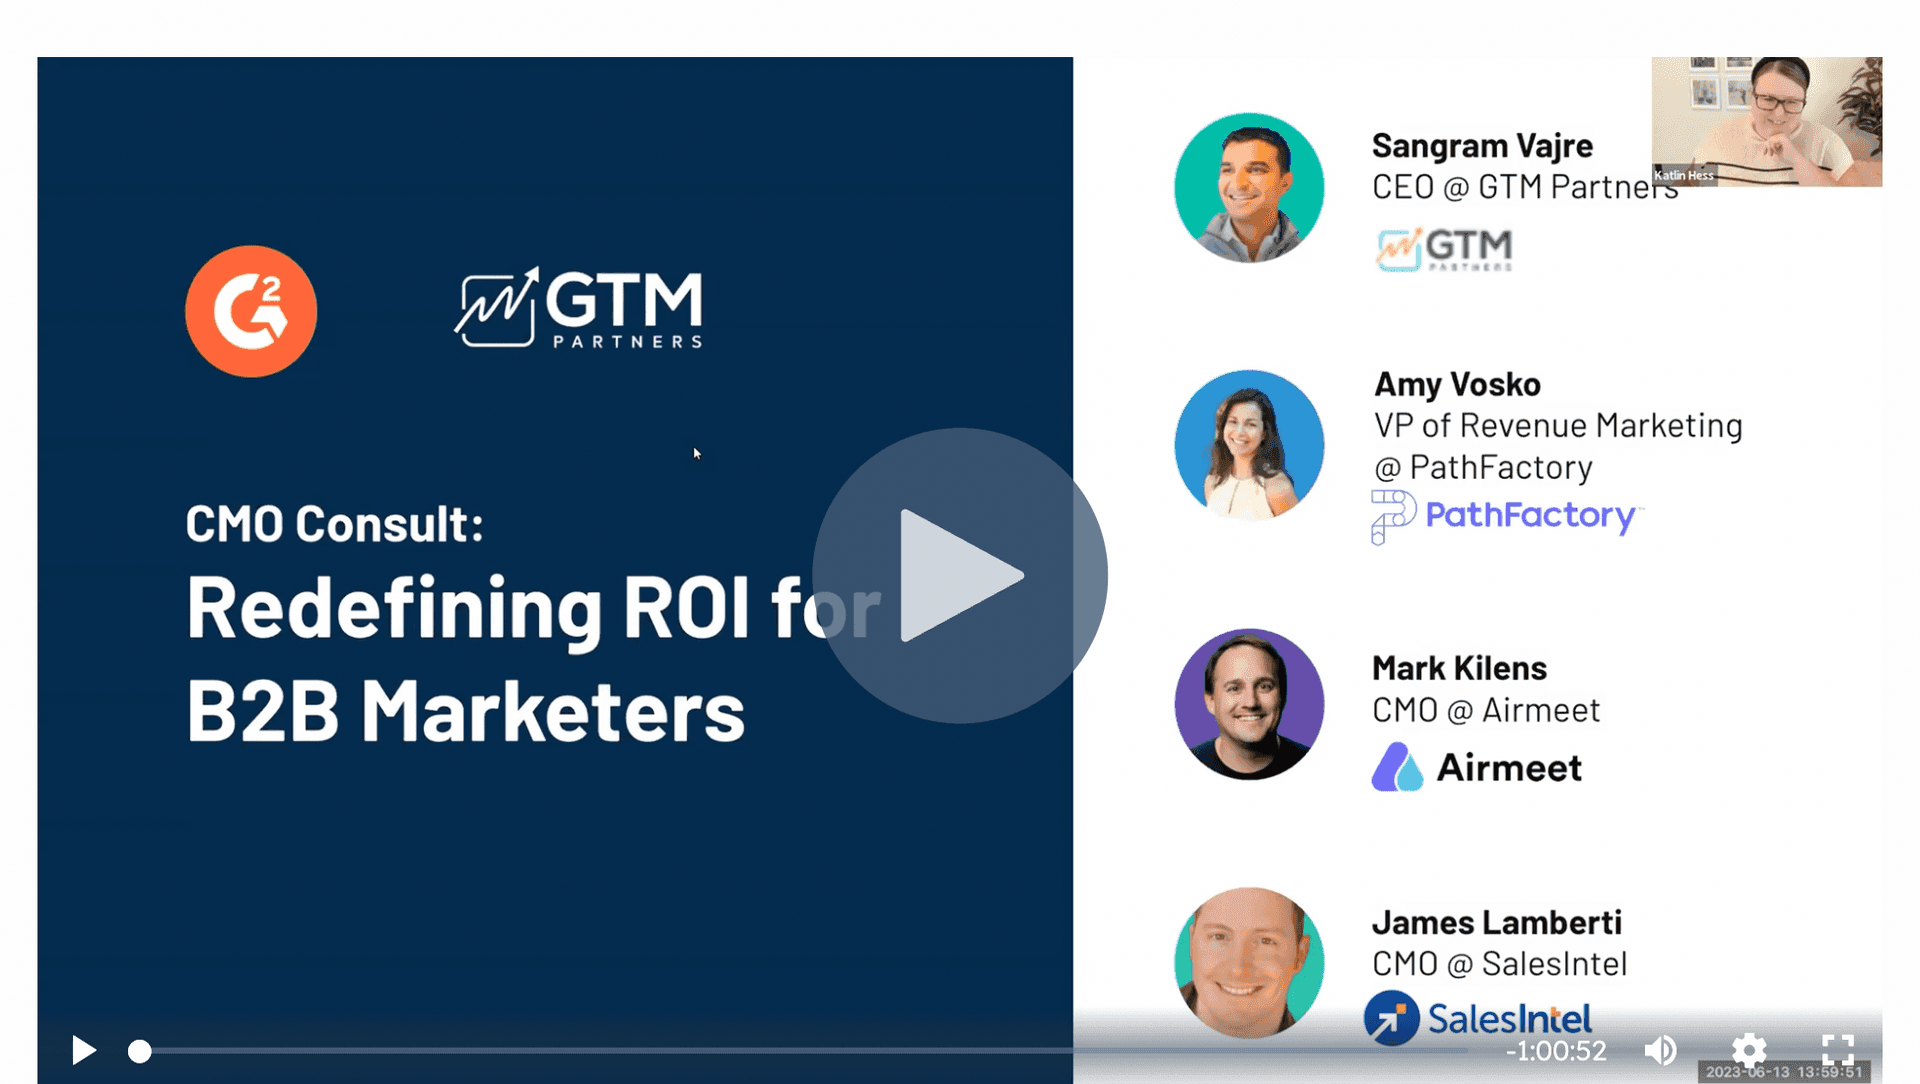 CMO Consult: Redefining ROI for B2B Marketers - with G2